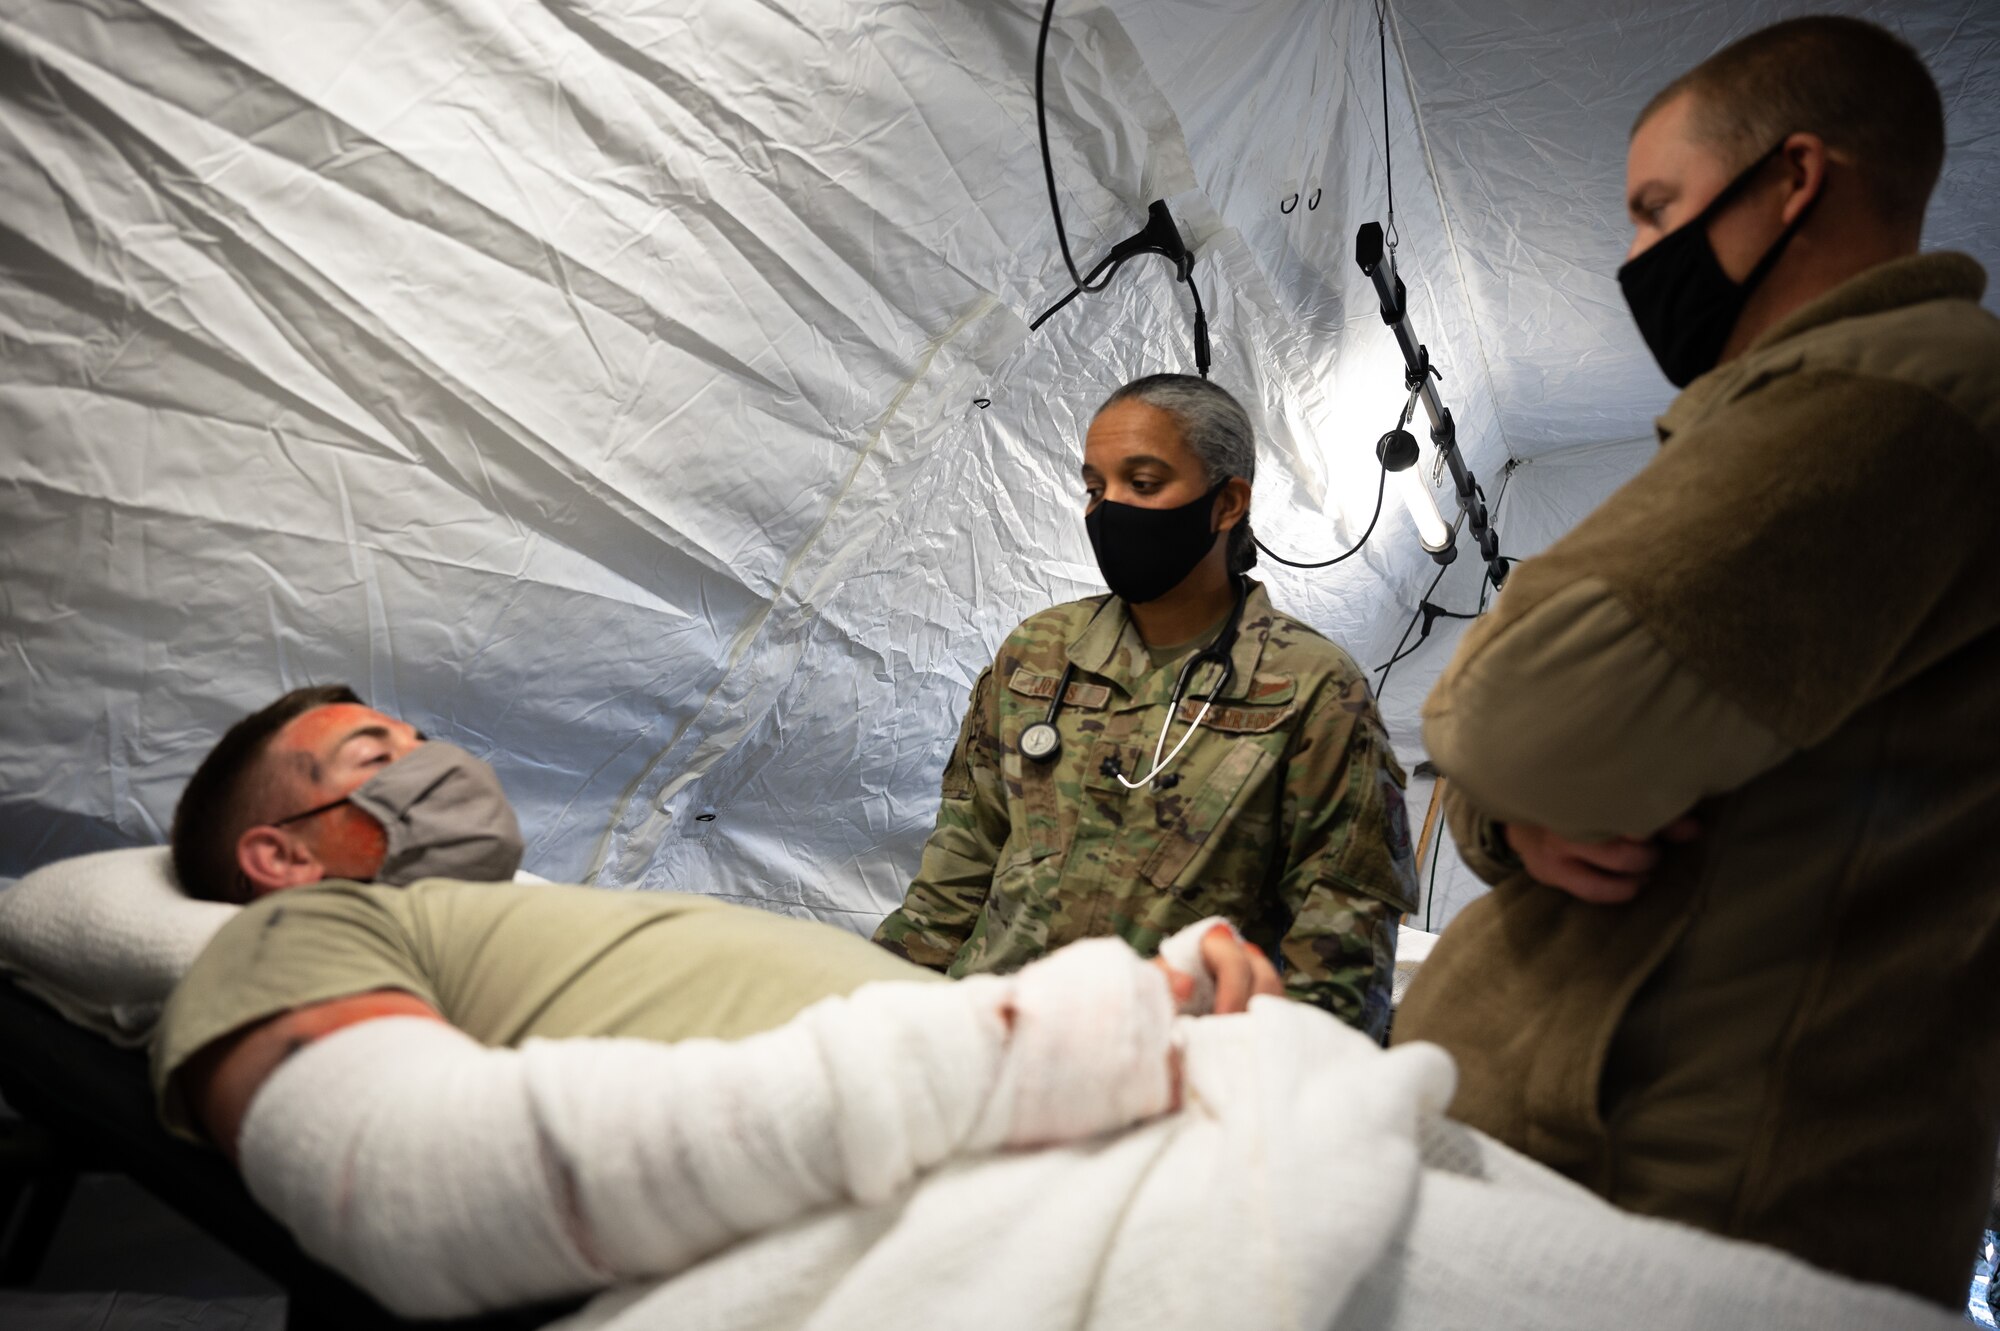 U.S. Airmen assigned to the 354th Fighter Wing and the 673rd Medical Group participate in a Capabilities-Based Assessment (CBA) at the Yukon Training Area, Sept. 14, 2021.